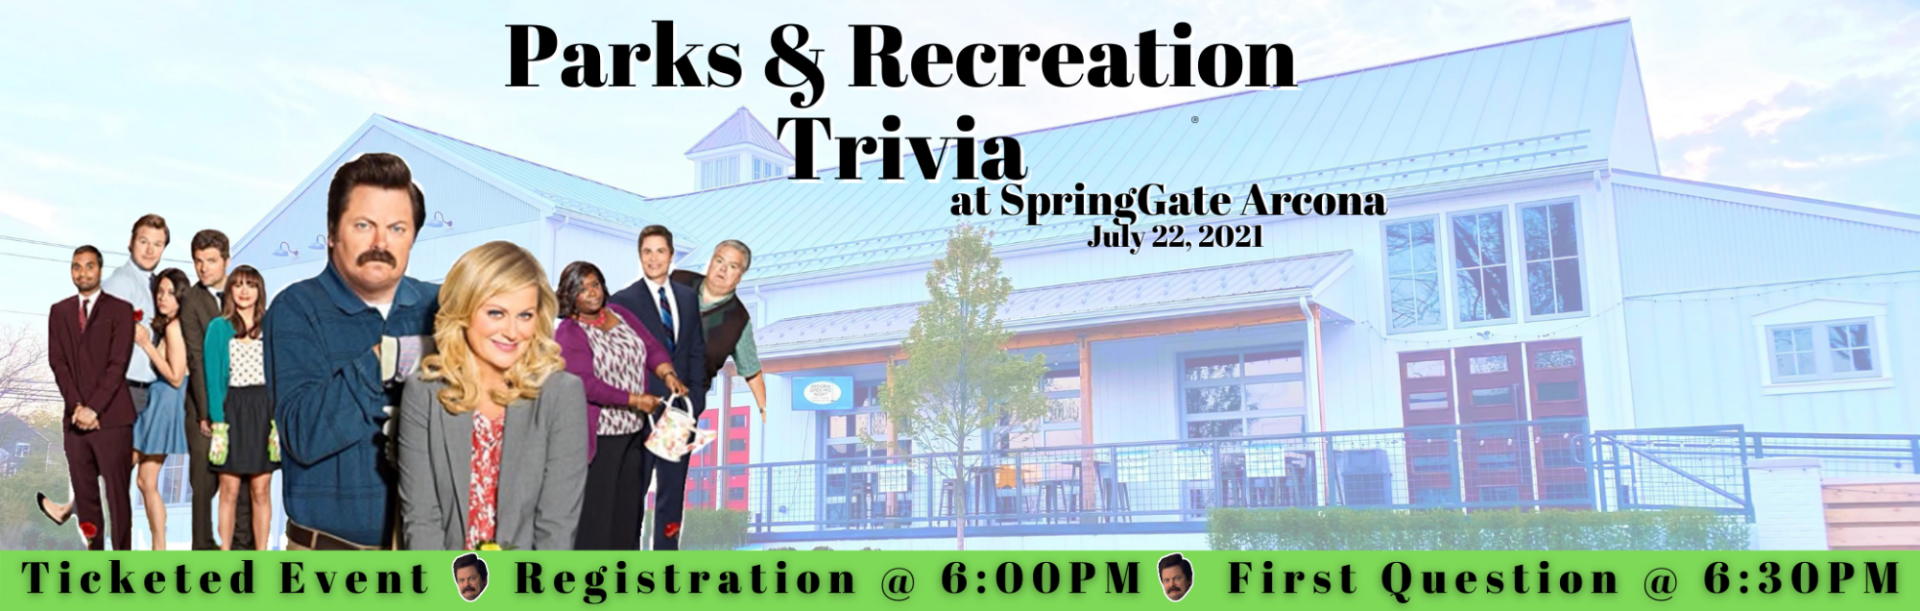 Buy Tickets For Parks Recreation Trivia Arcona At Springgate Arcona Thu Jul 22 2021 6 30 Pm 8 30 Pm